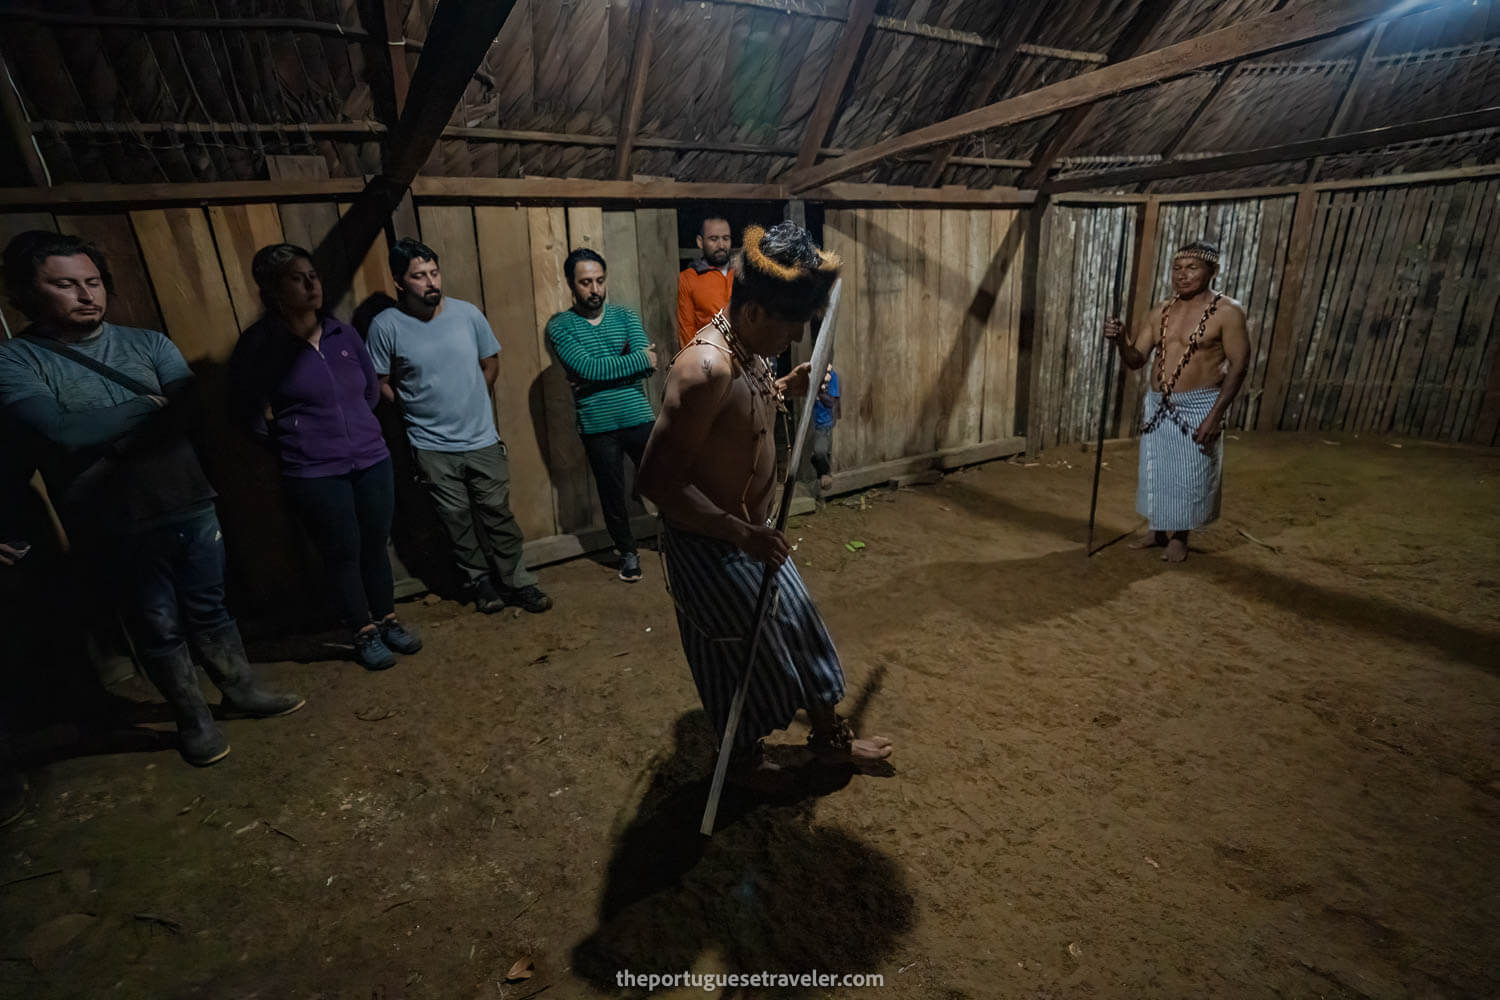 Jimmy dancing a tradicional Shuar dance and his father observing, on the Cueva de Los Tayos expedition.